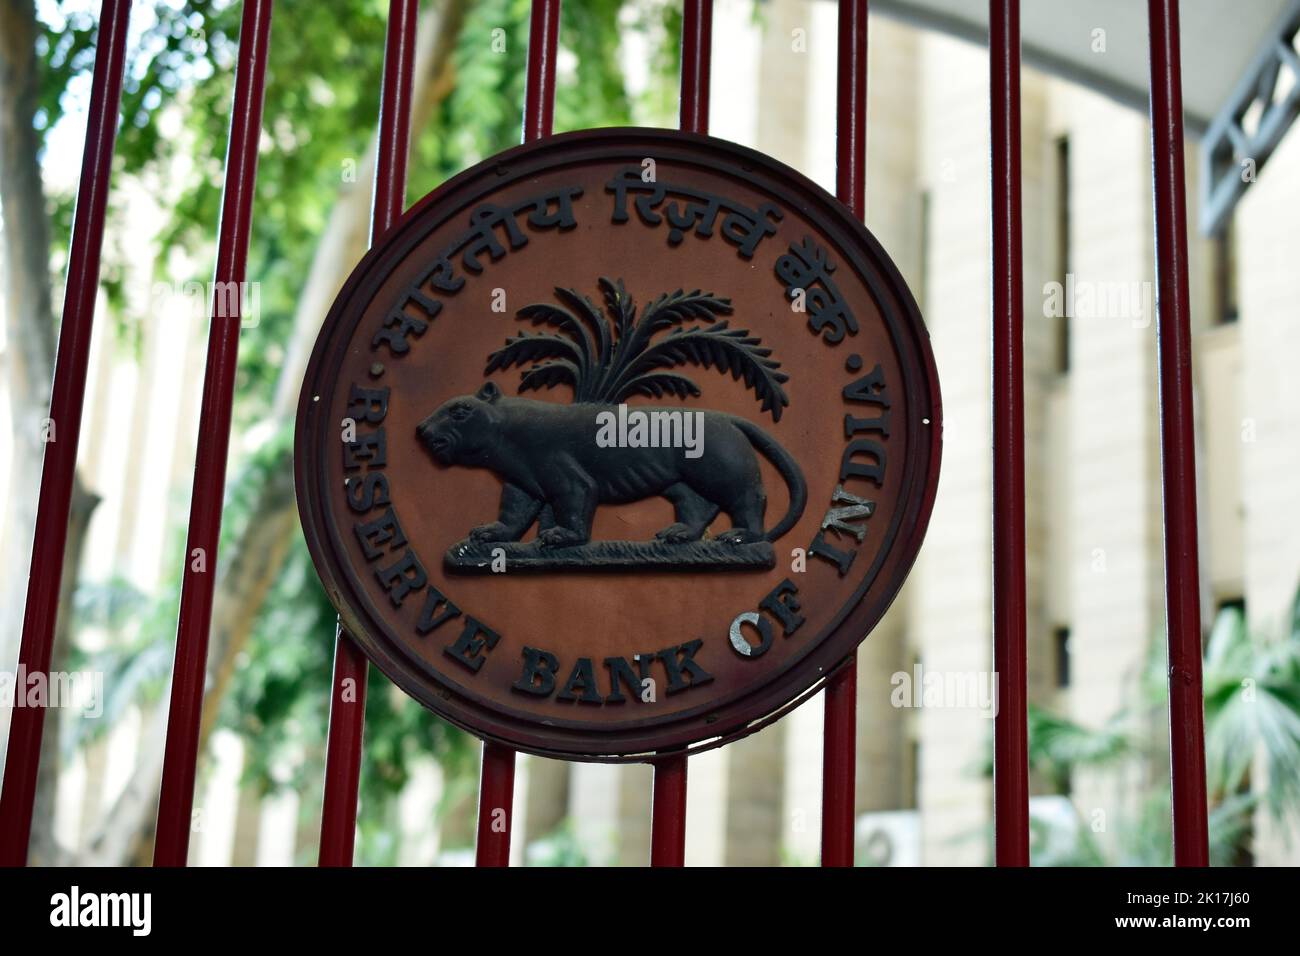 New Delhi, India - 14 September 2022 : RBI sign board on entrance gate of reserve bank of india Stock Photo